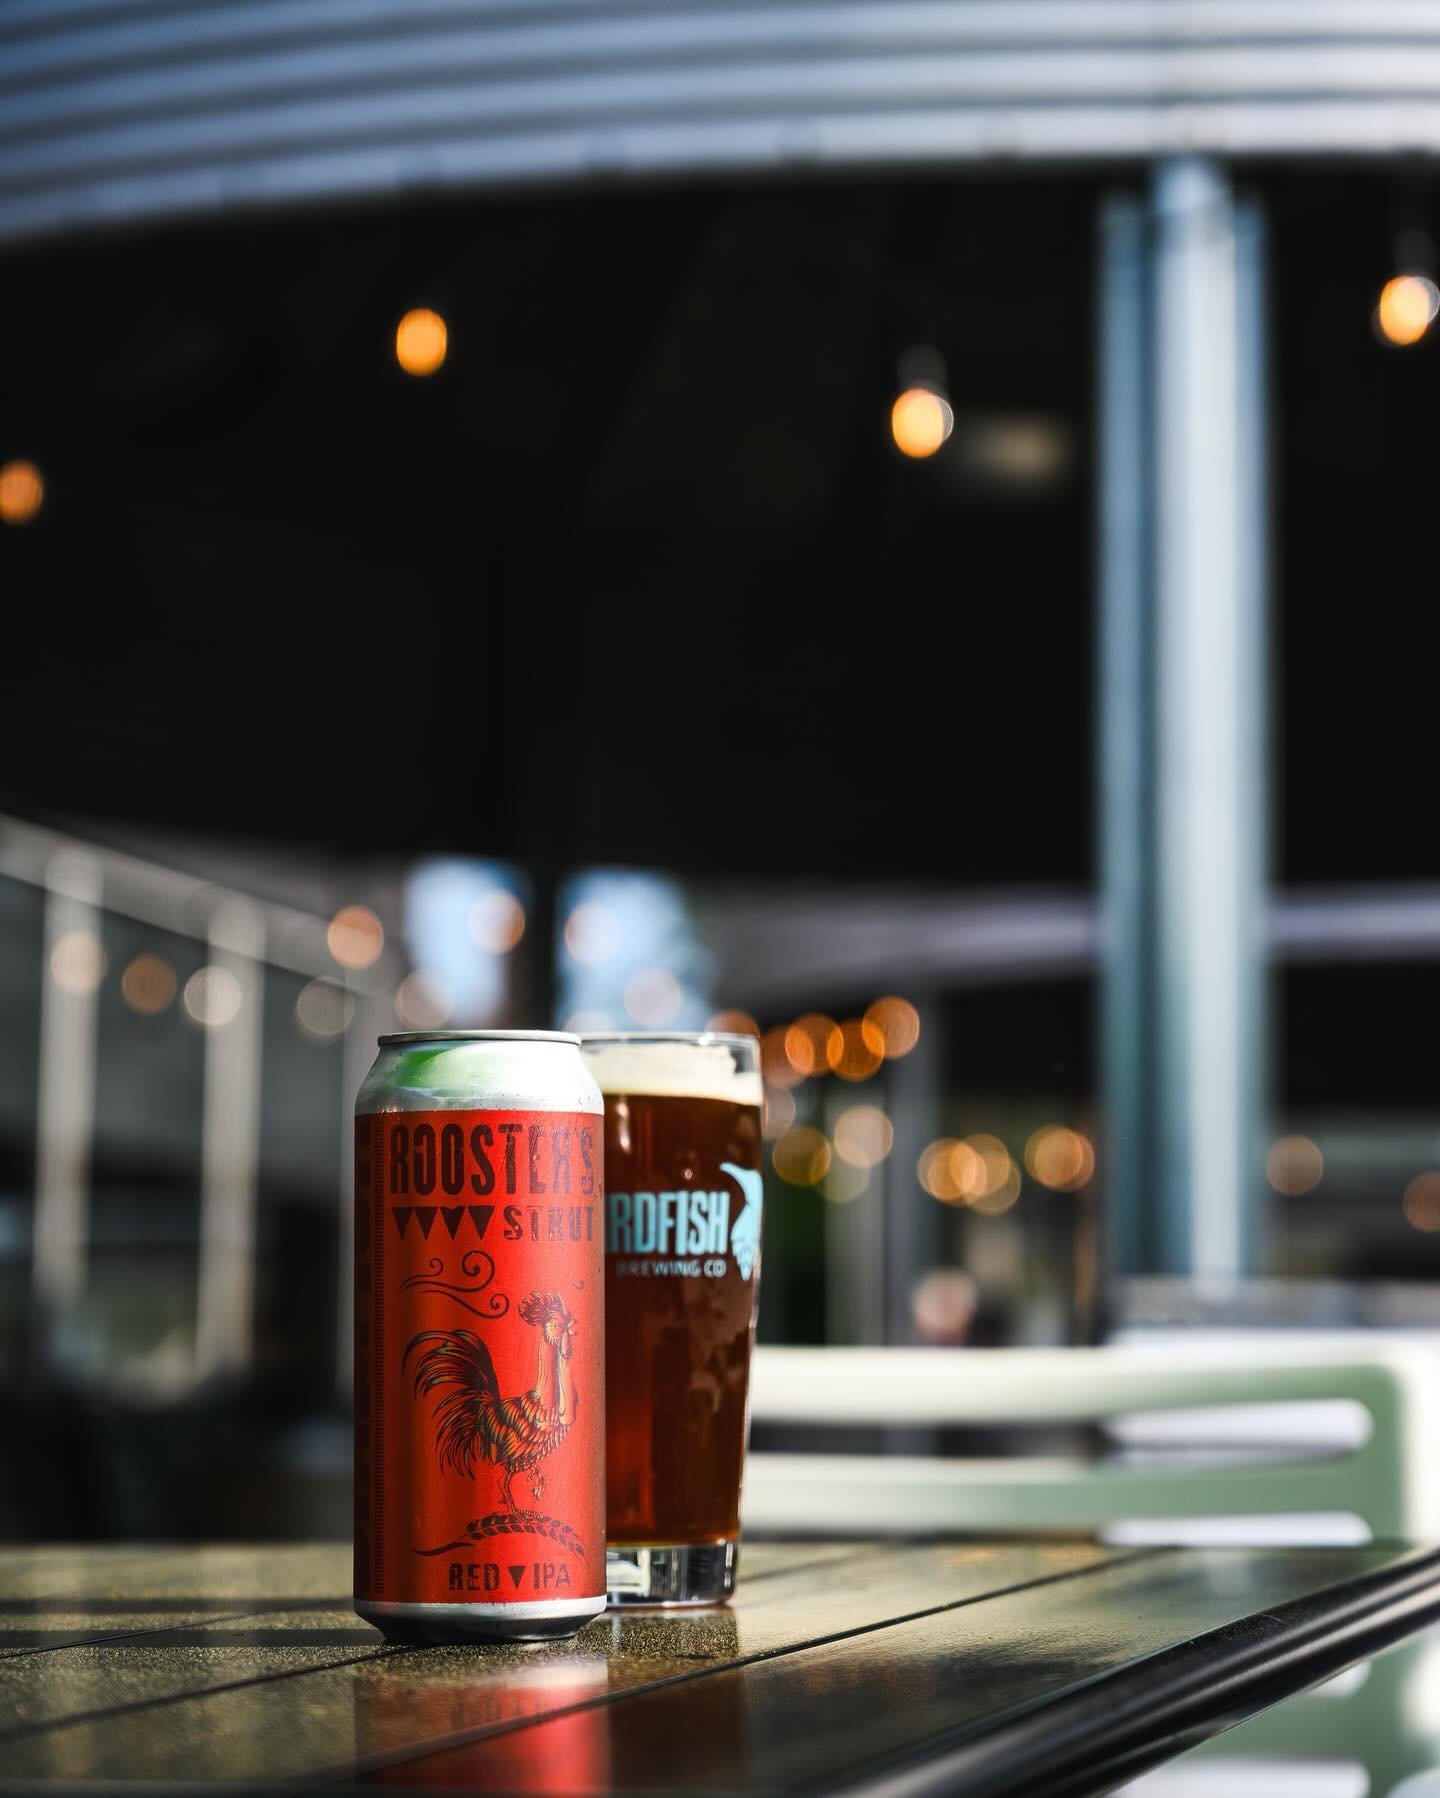 Our beer will make you crow 🐓

Rooster&rsquo;s Strut Red IPA on tap and available in cans to-go. @babcias_lunchbox today on the patio with fresh blueberry pierogi 🫐🪆🍻